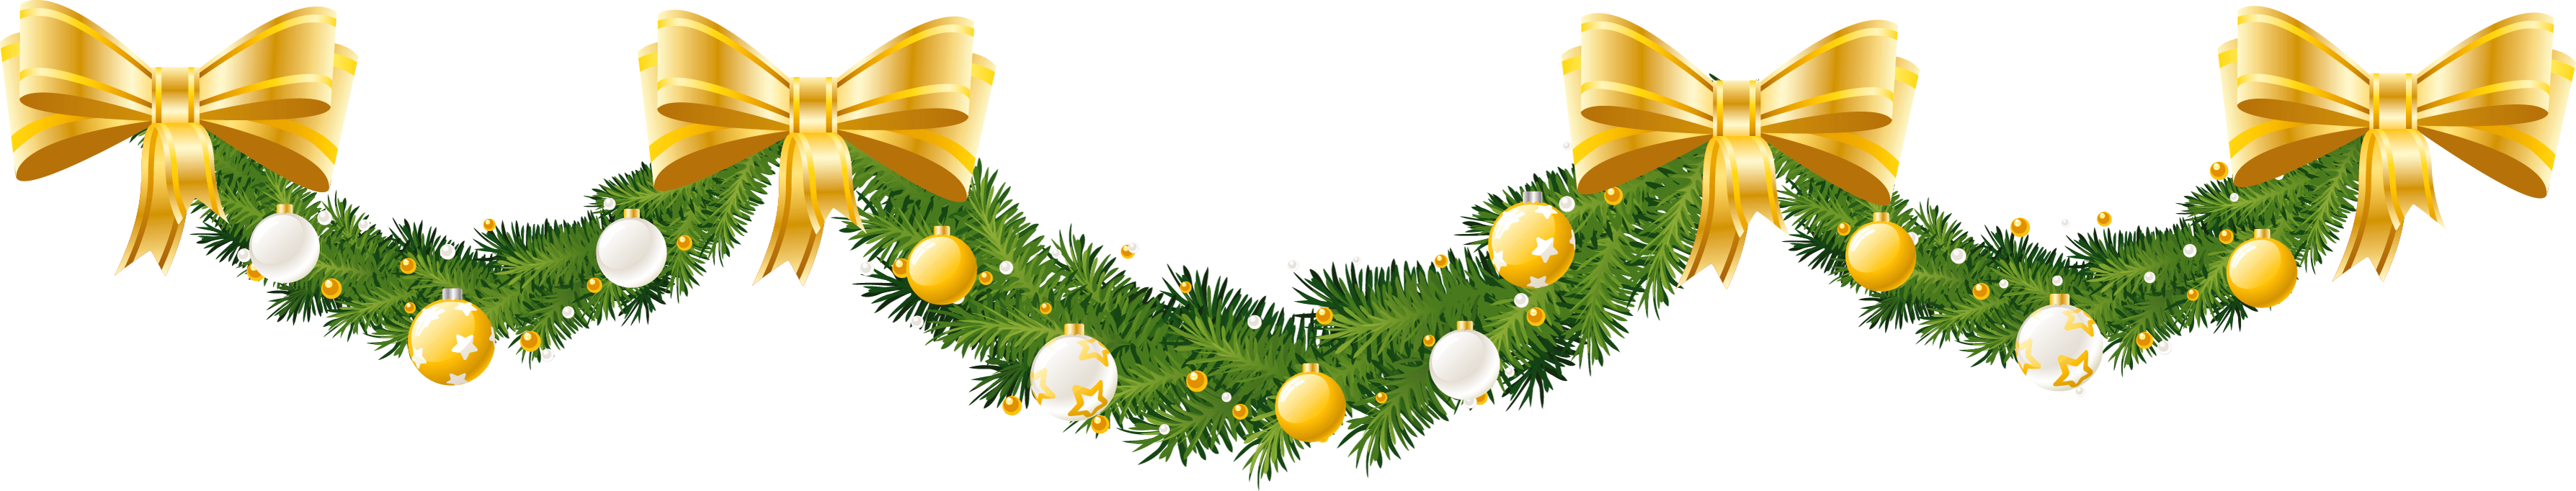 Clipart Christmas Garland | Clipart library - Free Clipart Images